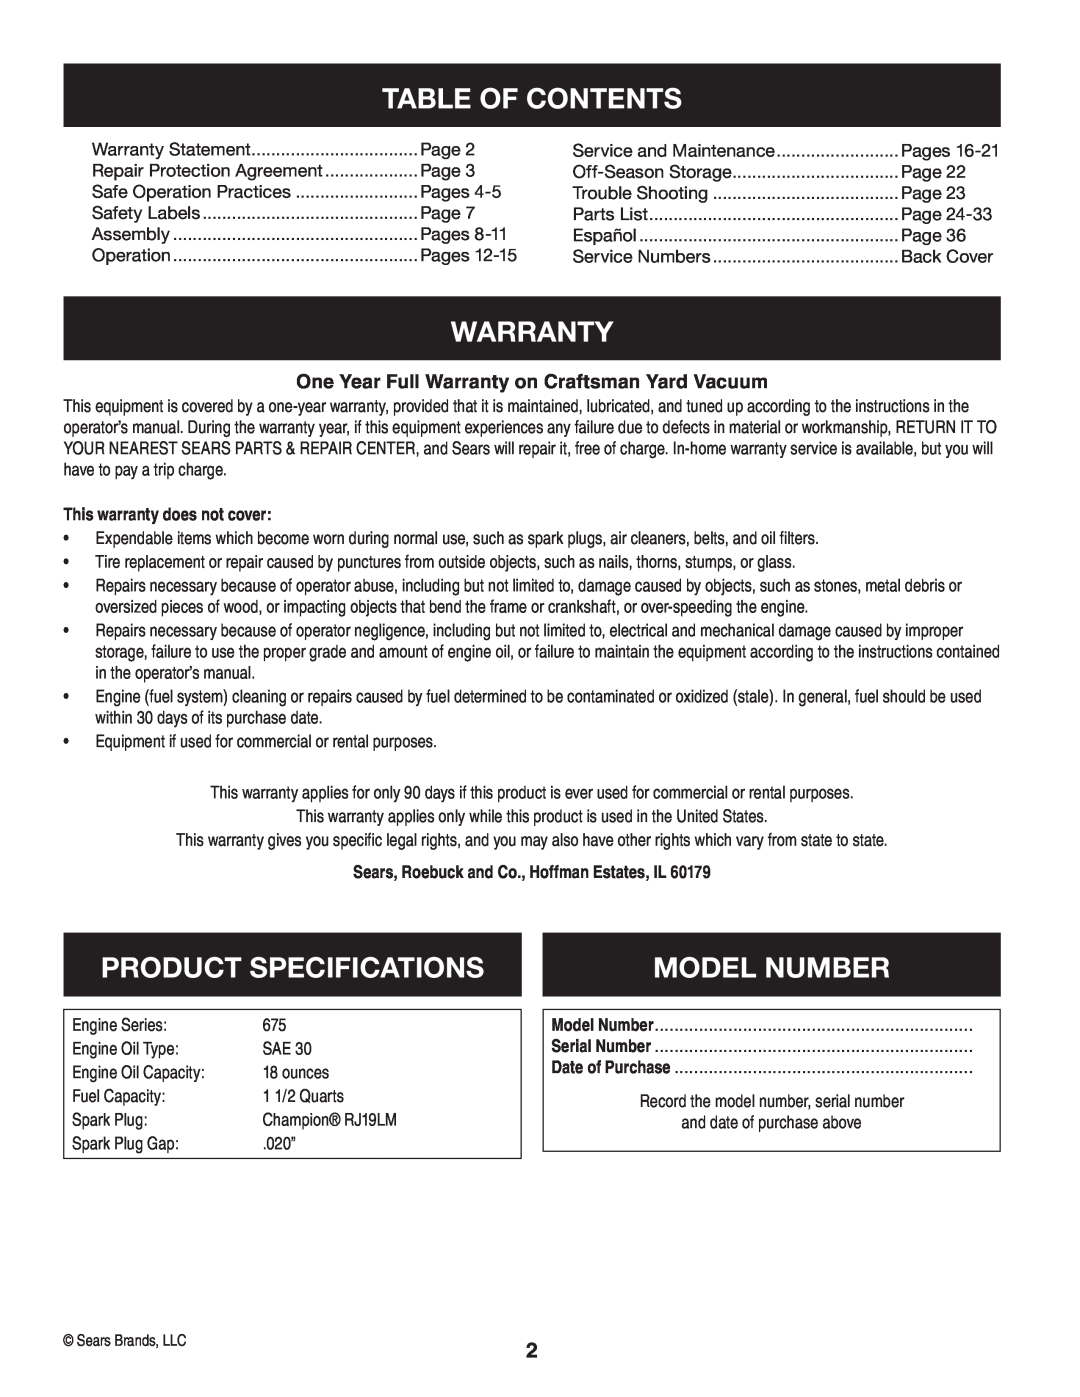 Craftsman 247.77013.0 Table Of Contents, Warranty, Product Specifications, Model Number, This warranty does not cover 